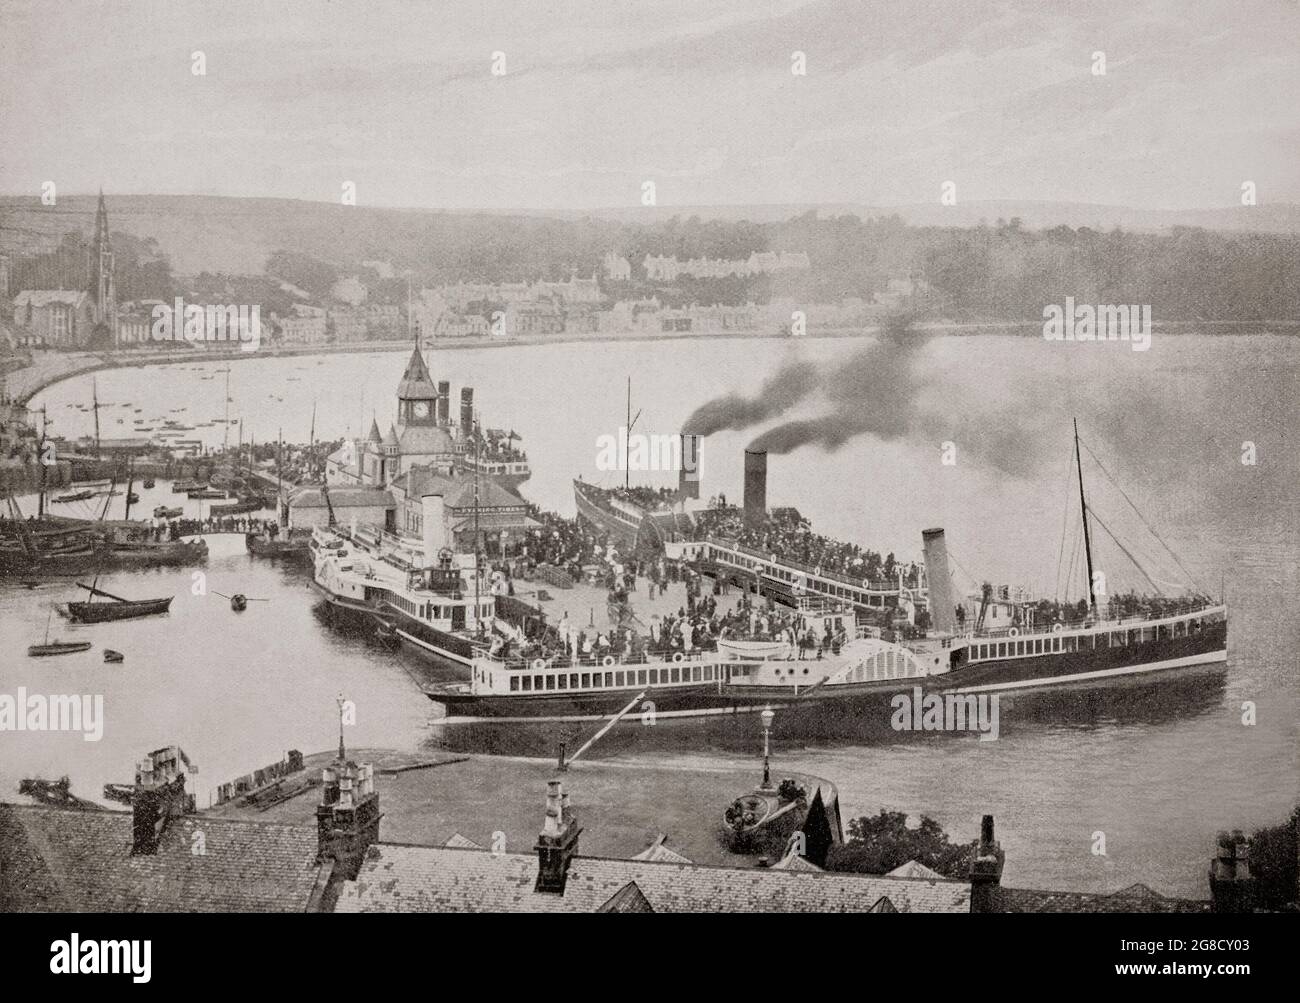 A late 19th century view of the harbour in Rothesay, the principal town on the Isle of Bute, lying on the coast of the Firth of Clyde in the council area of Argyll and Bute, Scotland. During the Victorian era, Rothesay became a popular tourist destination. In particular, it was hugely popular with Glaswegians going 'doon the watter' (literally “down the water” – a reference to the waters of the Firth of Clyde). Its wooden pier was busy with steamer traffic. It was home to one of Scotland's many hydropathic establishments, which were in vogue at the time. Stock Photo